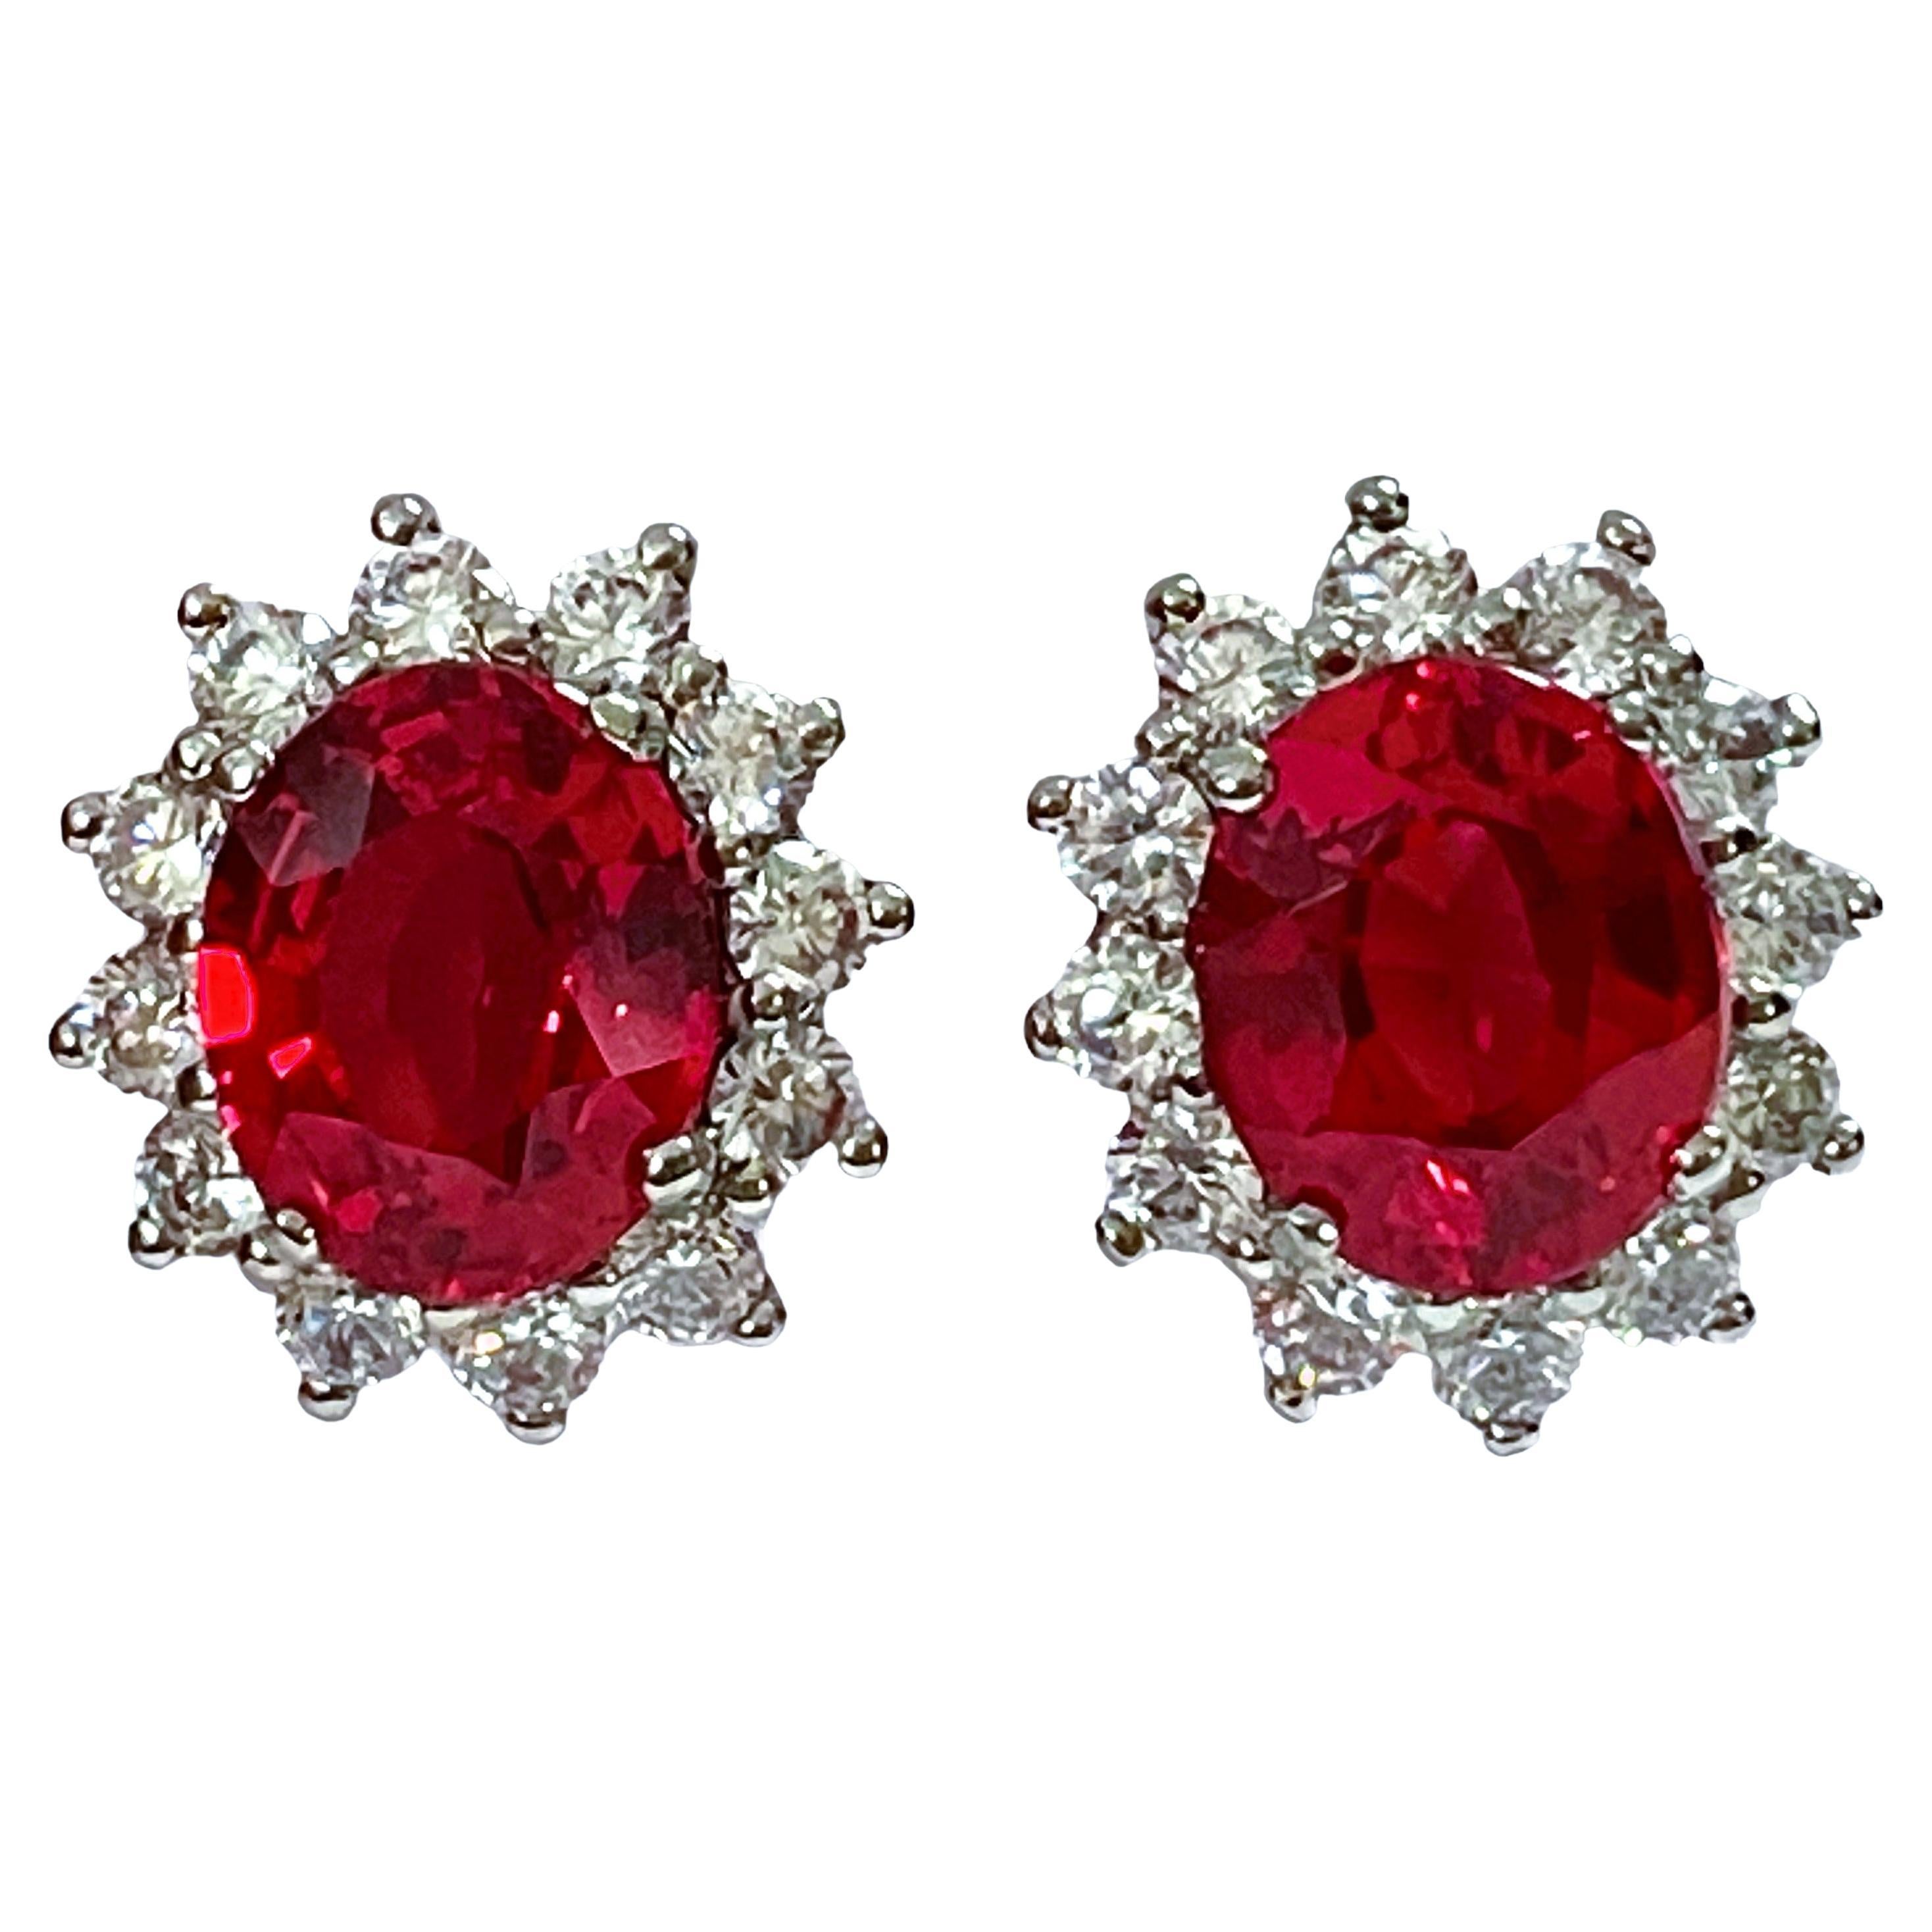 New African IF 12.7 Carat Padparadscha & White Sapphire Sterling Earrings